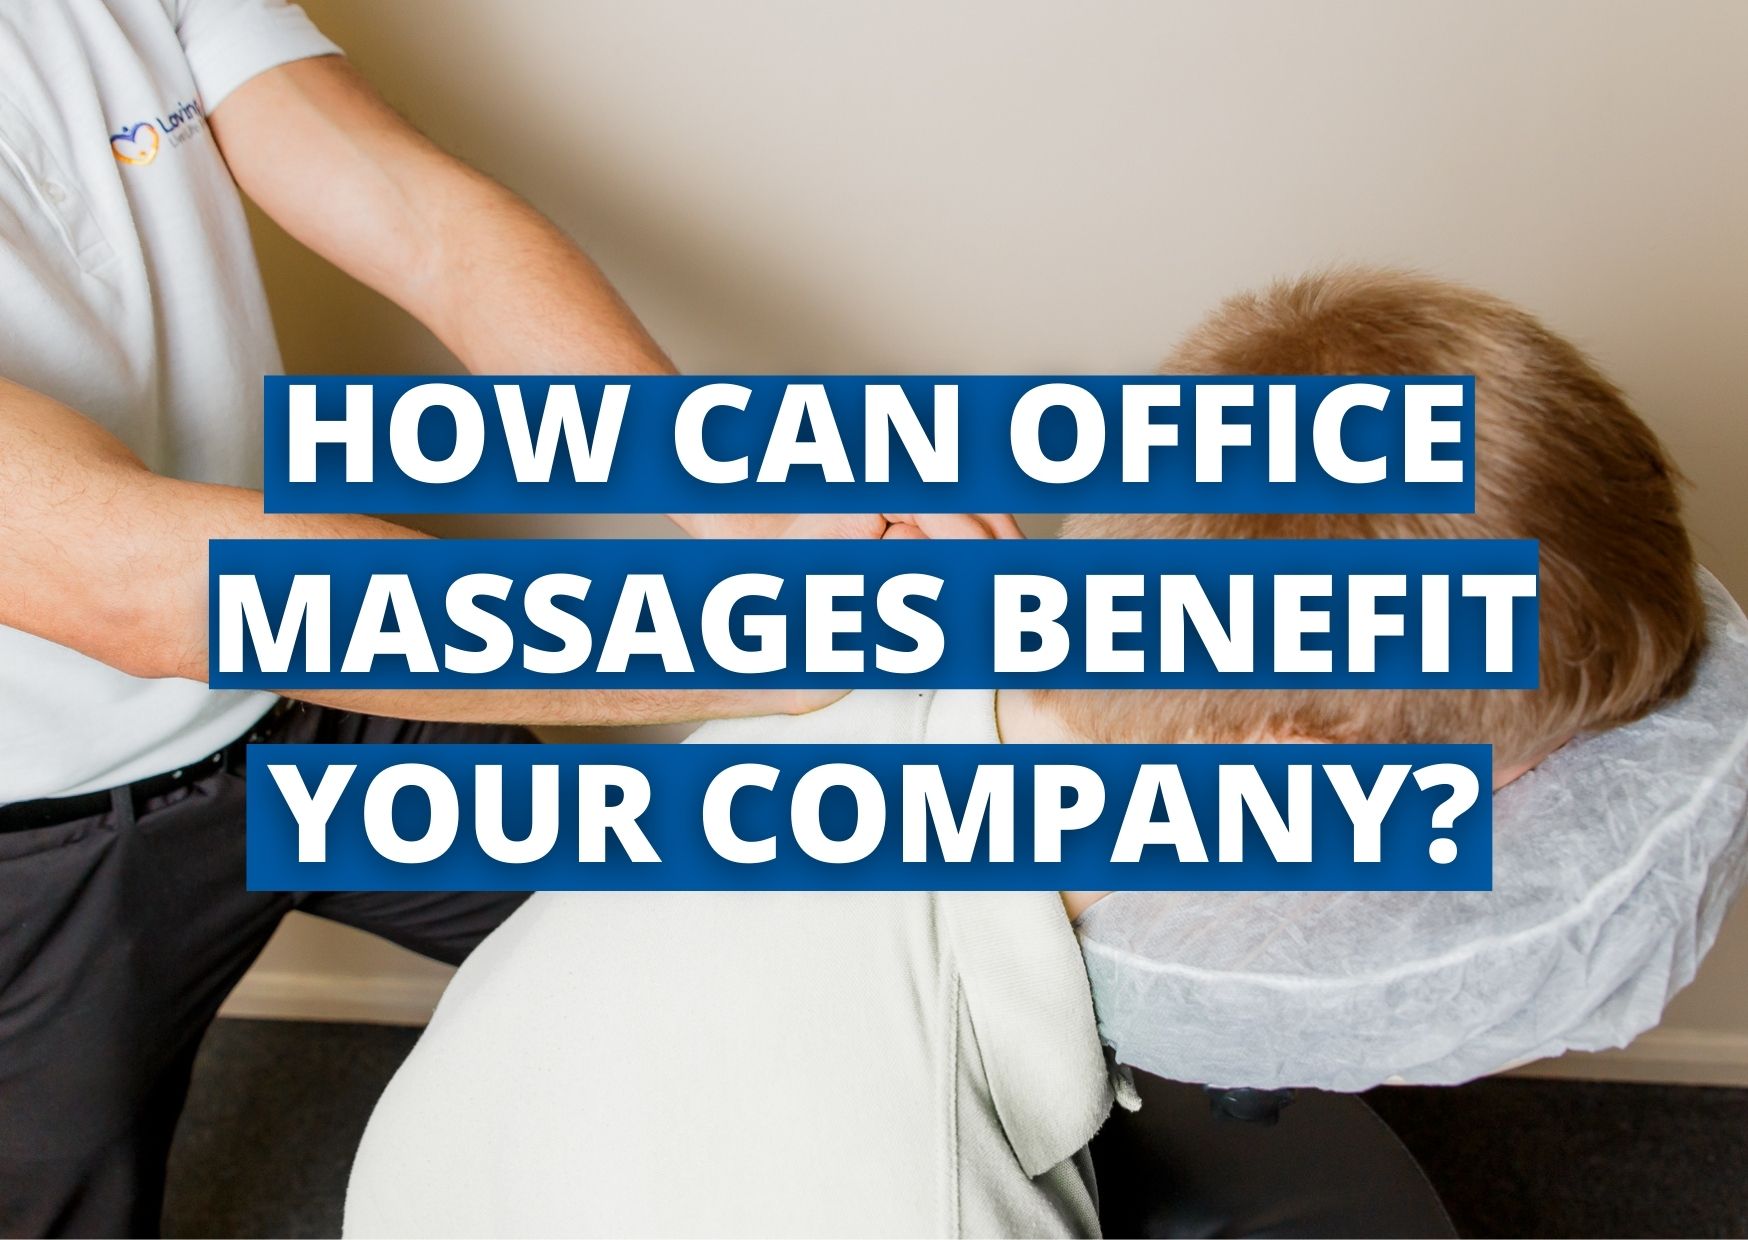 HOW CAN OFFICE MASSAGES BENEFIT YOUR COMPANY 